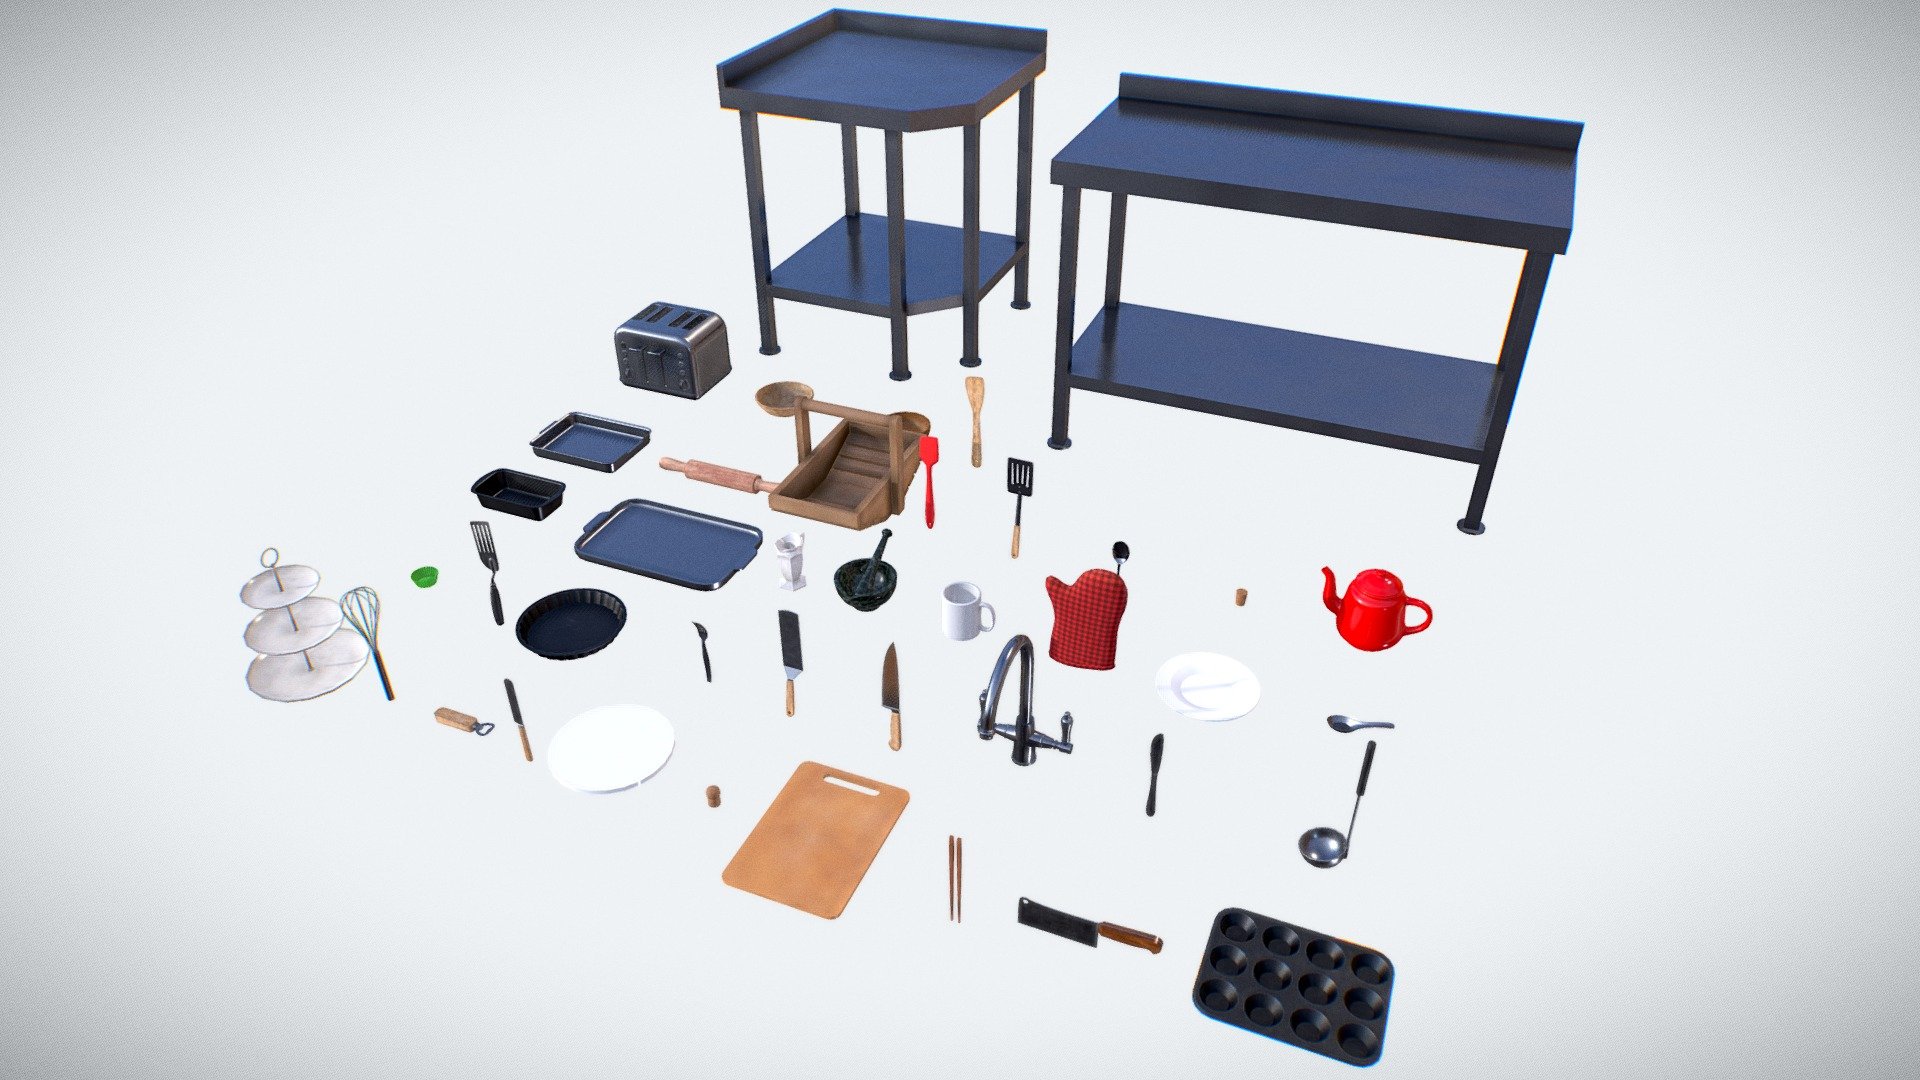 Kitchen Assets Pack - 41 Realistic Objects

Every assets are using 2048x2048 highly realistic textures ( Base Color - Metalness - Roughness - Normal). 
Every asset is optimized and UV Unwrapped. This means these models can be used in any work.

This pack contains : 
3 tier cake stand - Balloon whisk - bottle opener - butter knife - cake stand - champagne cork - chopping board - chopsticks - cleaver - cupcake baking tray - cupcake case - fish slice - flan tin - fork - griddle spatula - kitchen knife - kitchen tap - ladle - loaf tin - metal tray - milk jug - mortar and pestle - mug - plate - rice spoon - roasting tray - rolling pin - rustic wood hand basket - silicone spatula - spoon - tapered cork - teapot - toaster - wooden bowl - wooden spatula - food preparation table + corner - knife - oven glove - Kitchen Assets Pack - 41 Realistic Props - Buy Royalty Free 3D model by remidoes3d 3d model